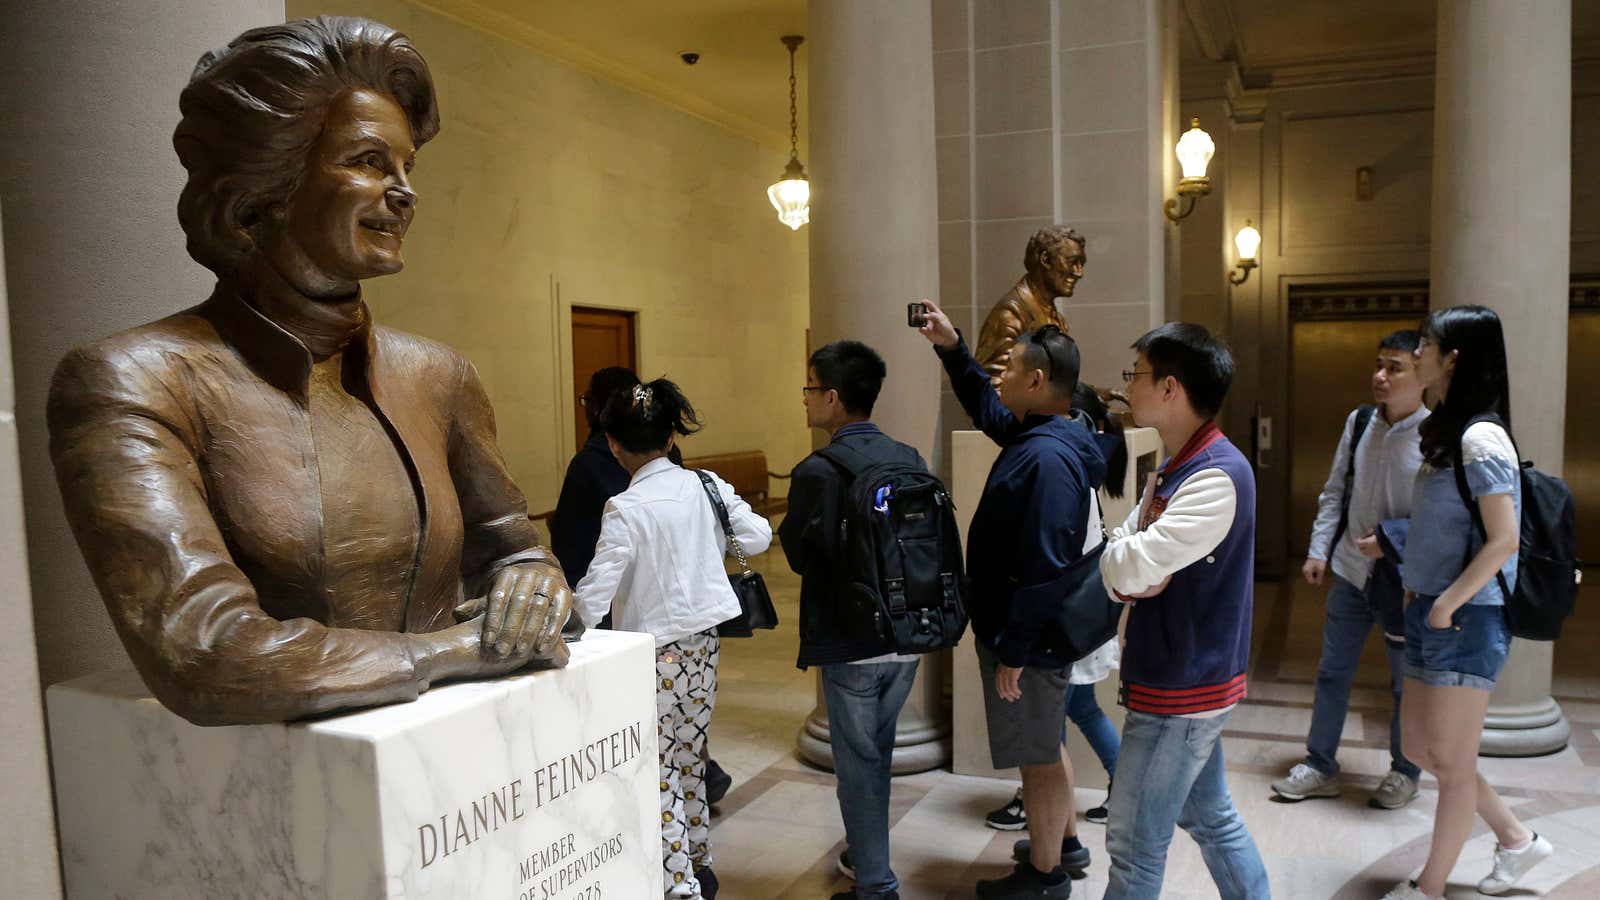 The bust of Dianne Feinstein at City Hall in San Francisco